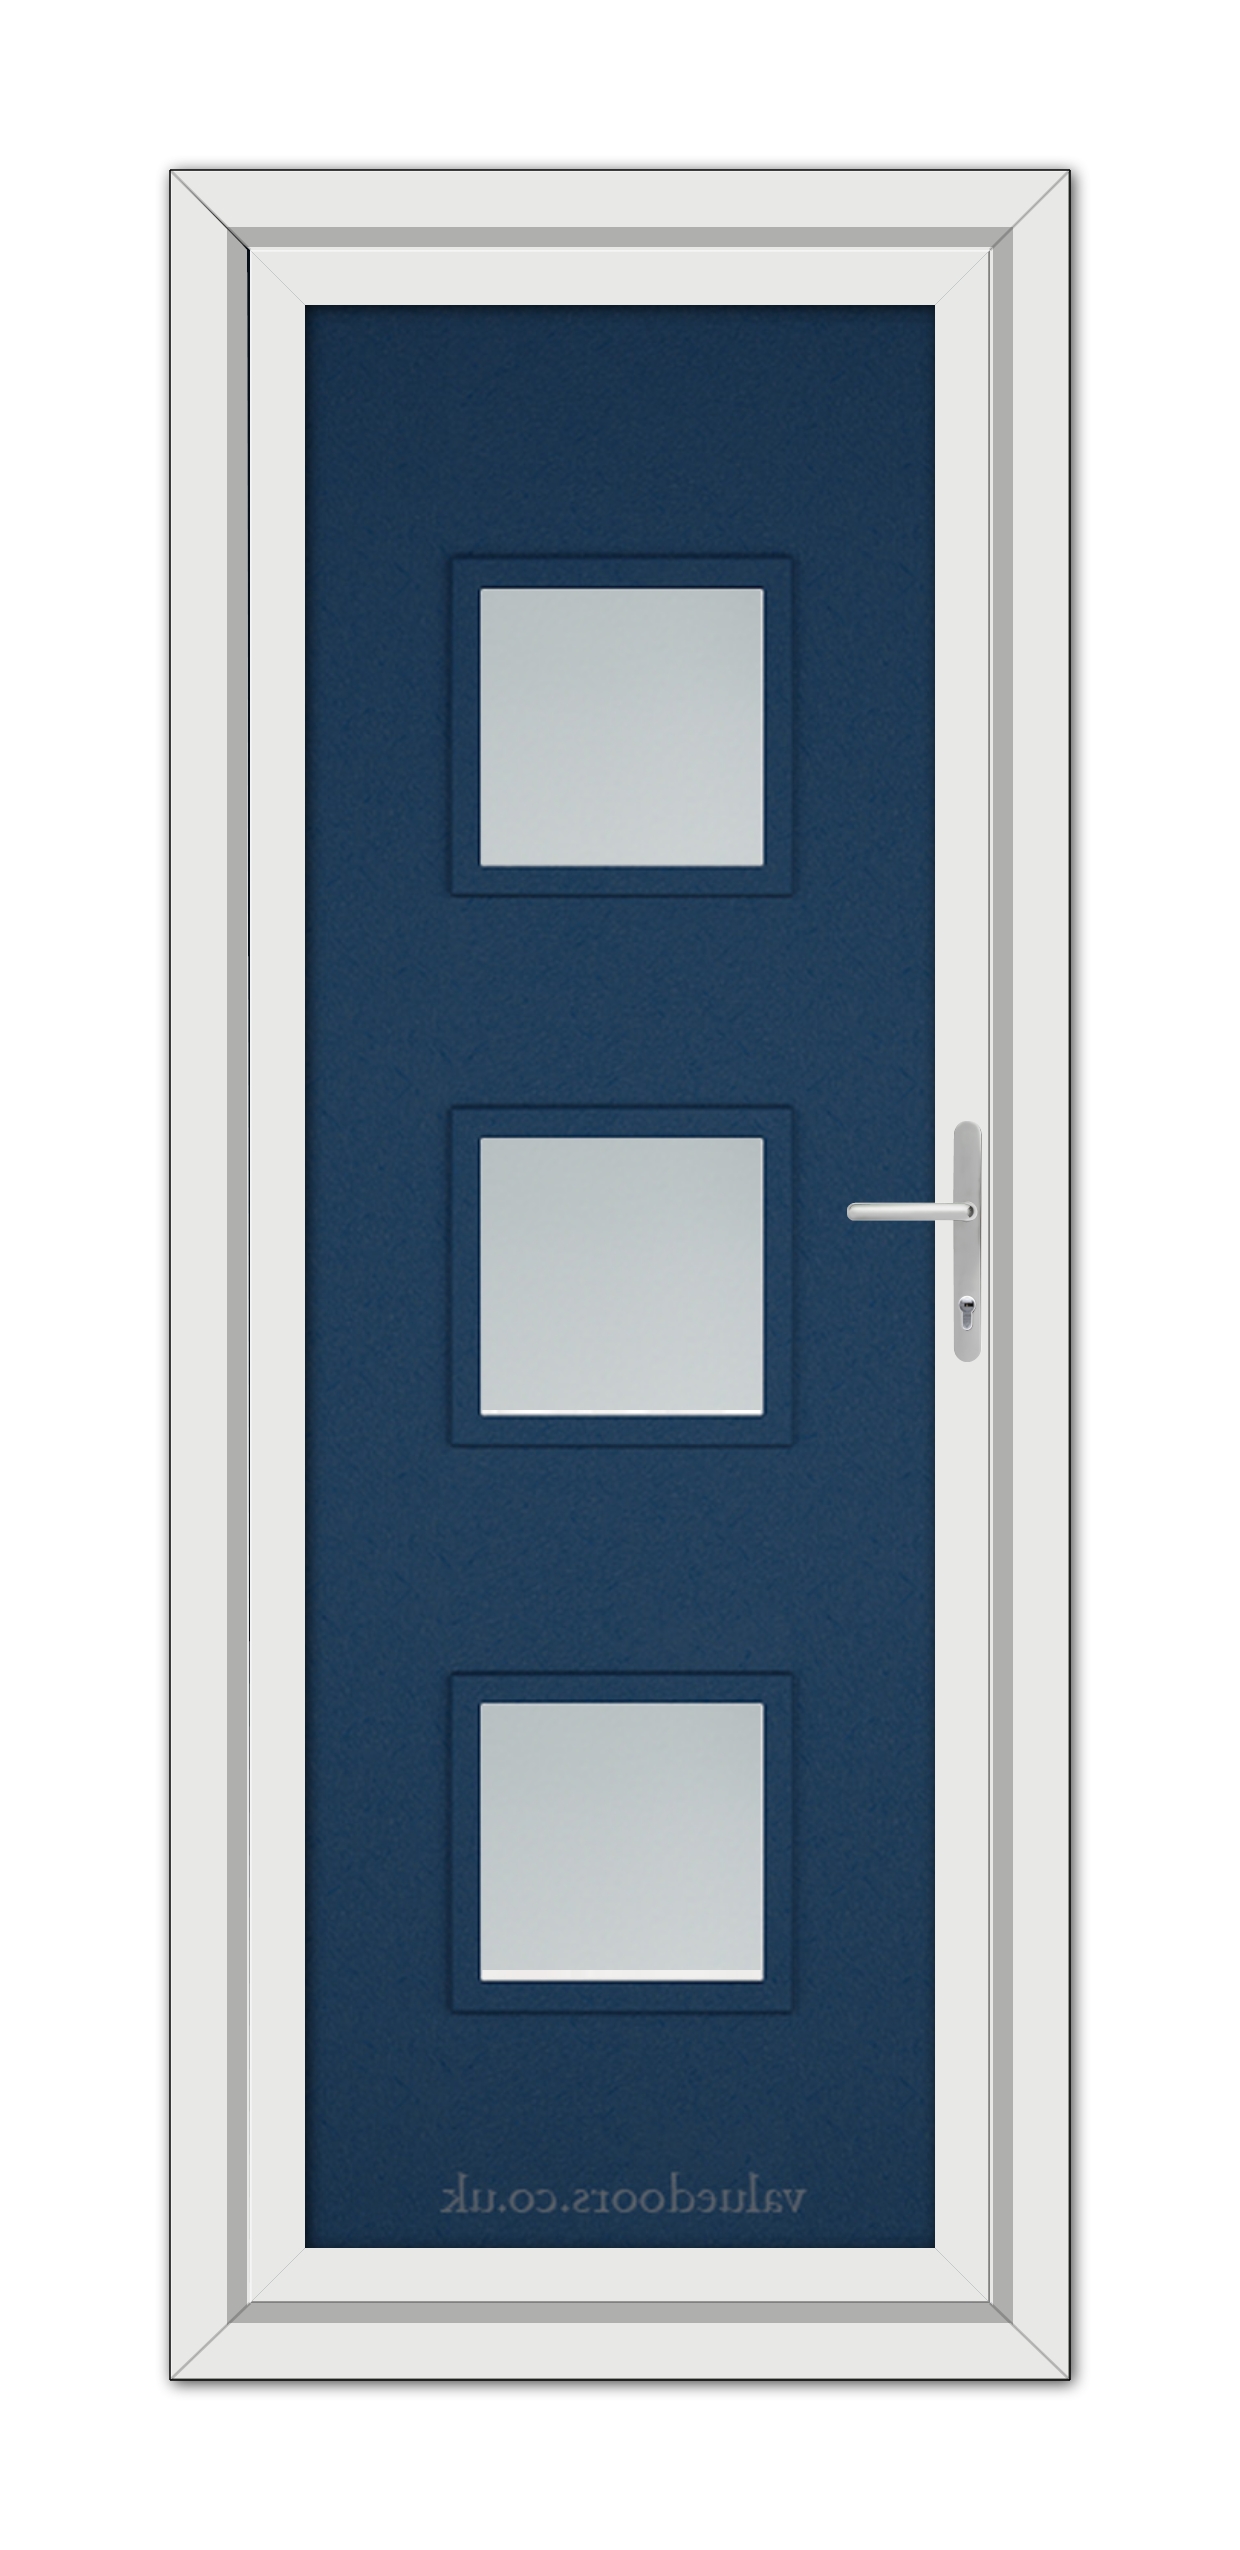 A Blue Modern 5013 uPVC door with three rectangular frosted glass windows and a silver handle, framed within a white door frame.